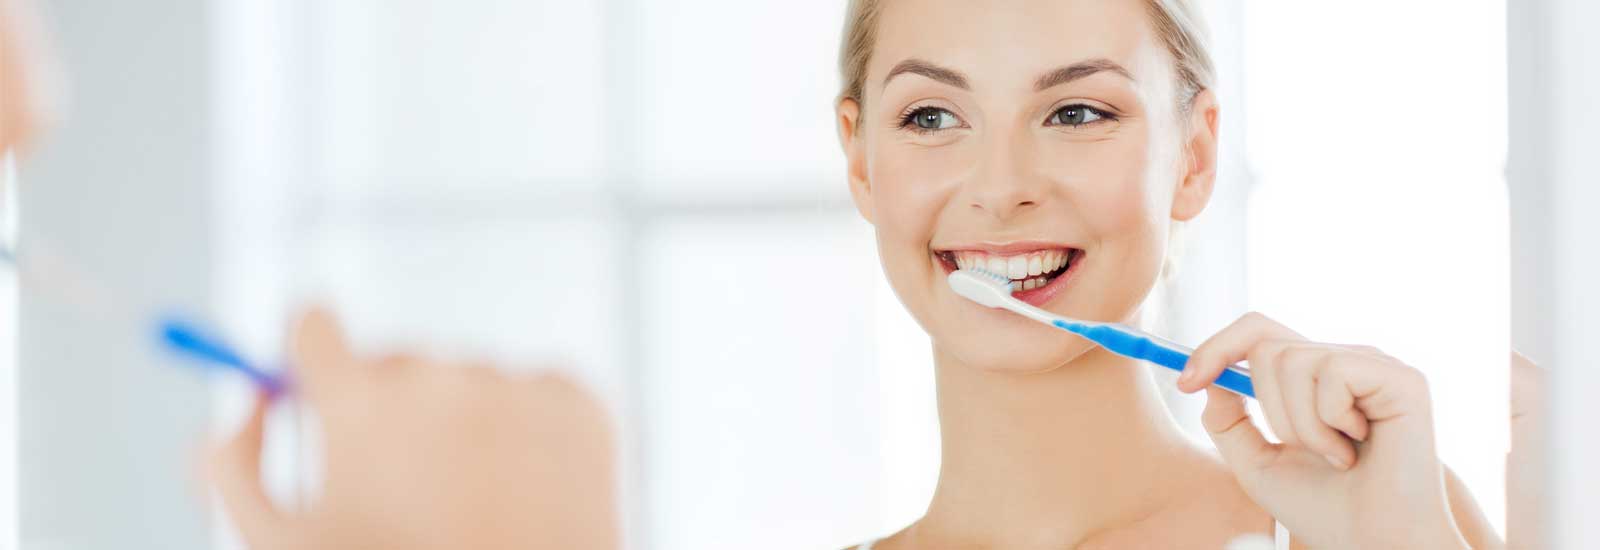 Obtain regular dental cleanings and exams for healthy smiles